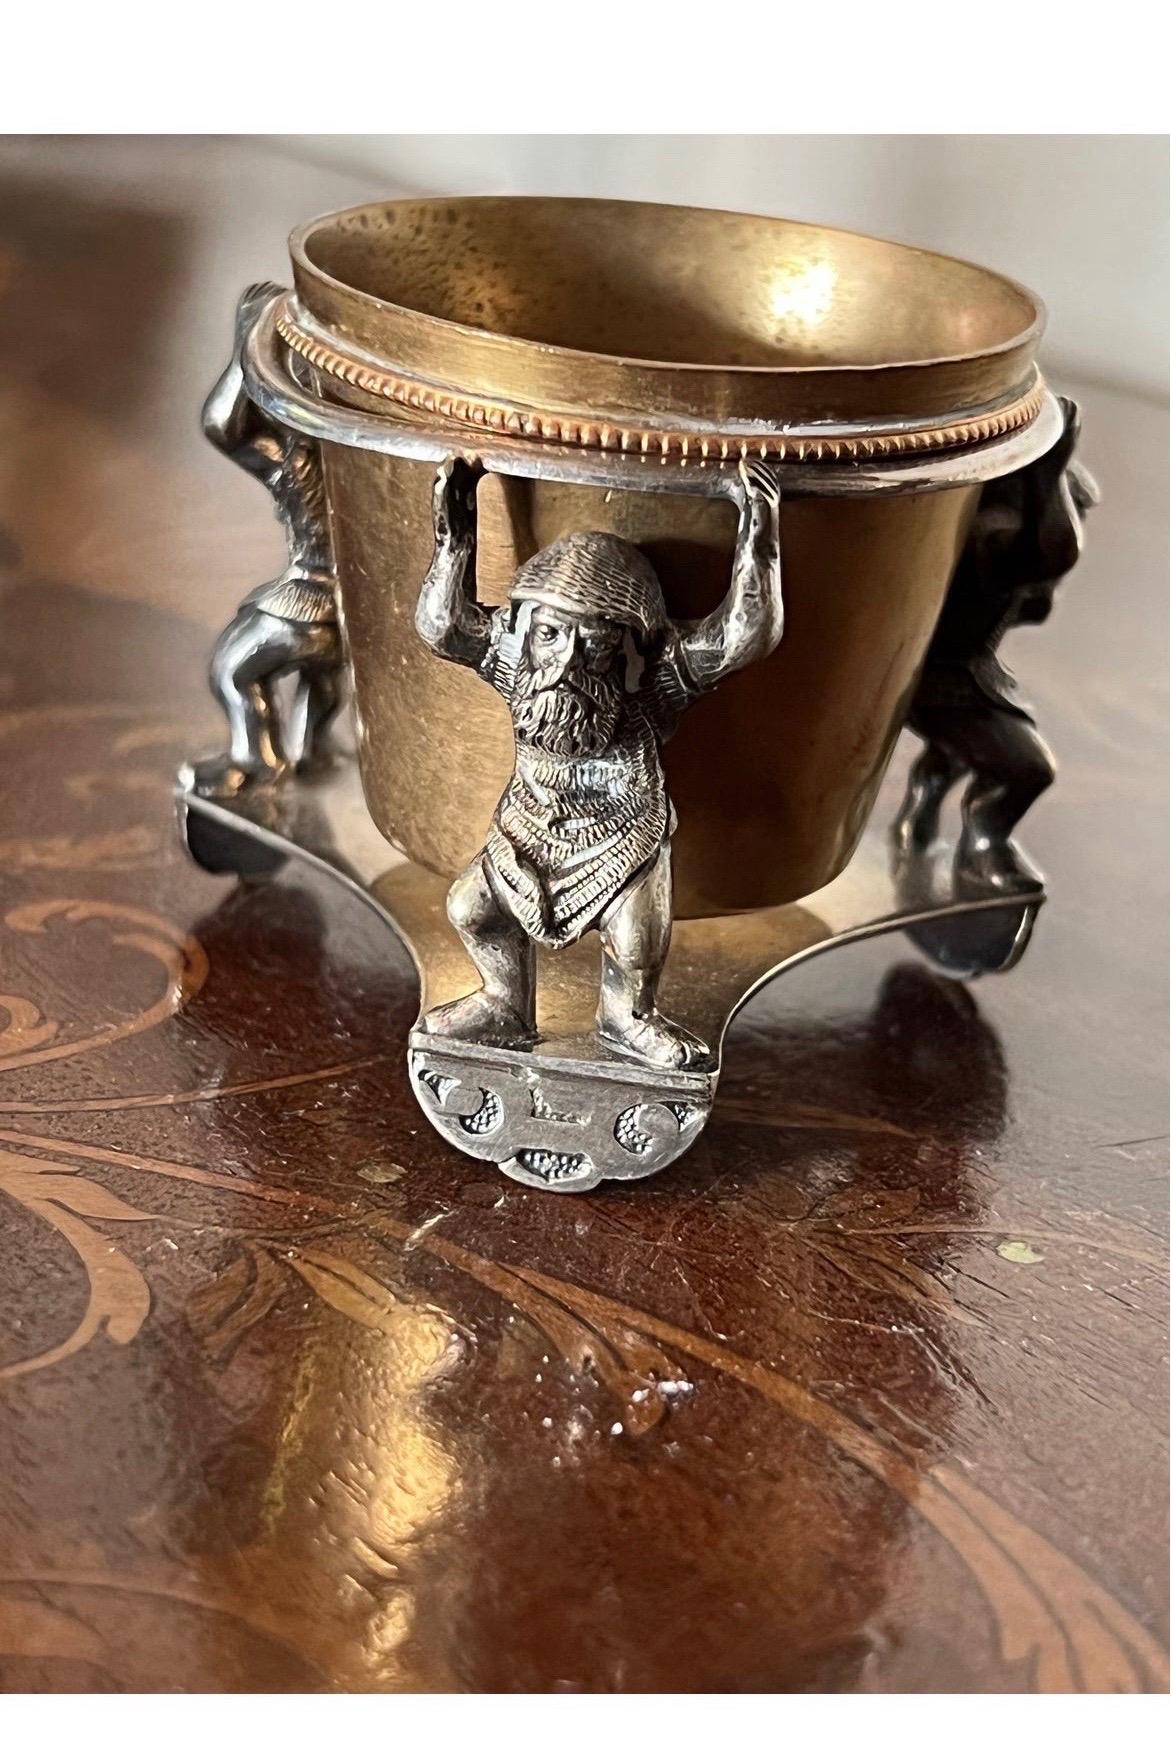 Thomas Latham & Ernest Morton, Birmingham, Mid 19th Century, the tri-form base mounted with three trolls or dwarves and supporting detachable gilt well!.